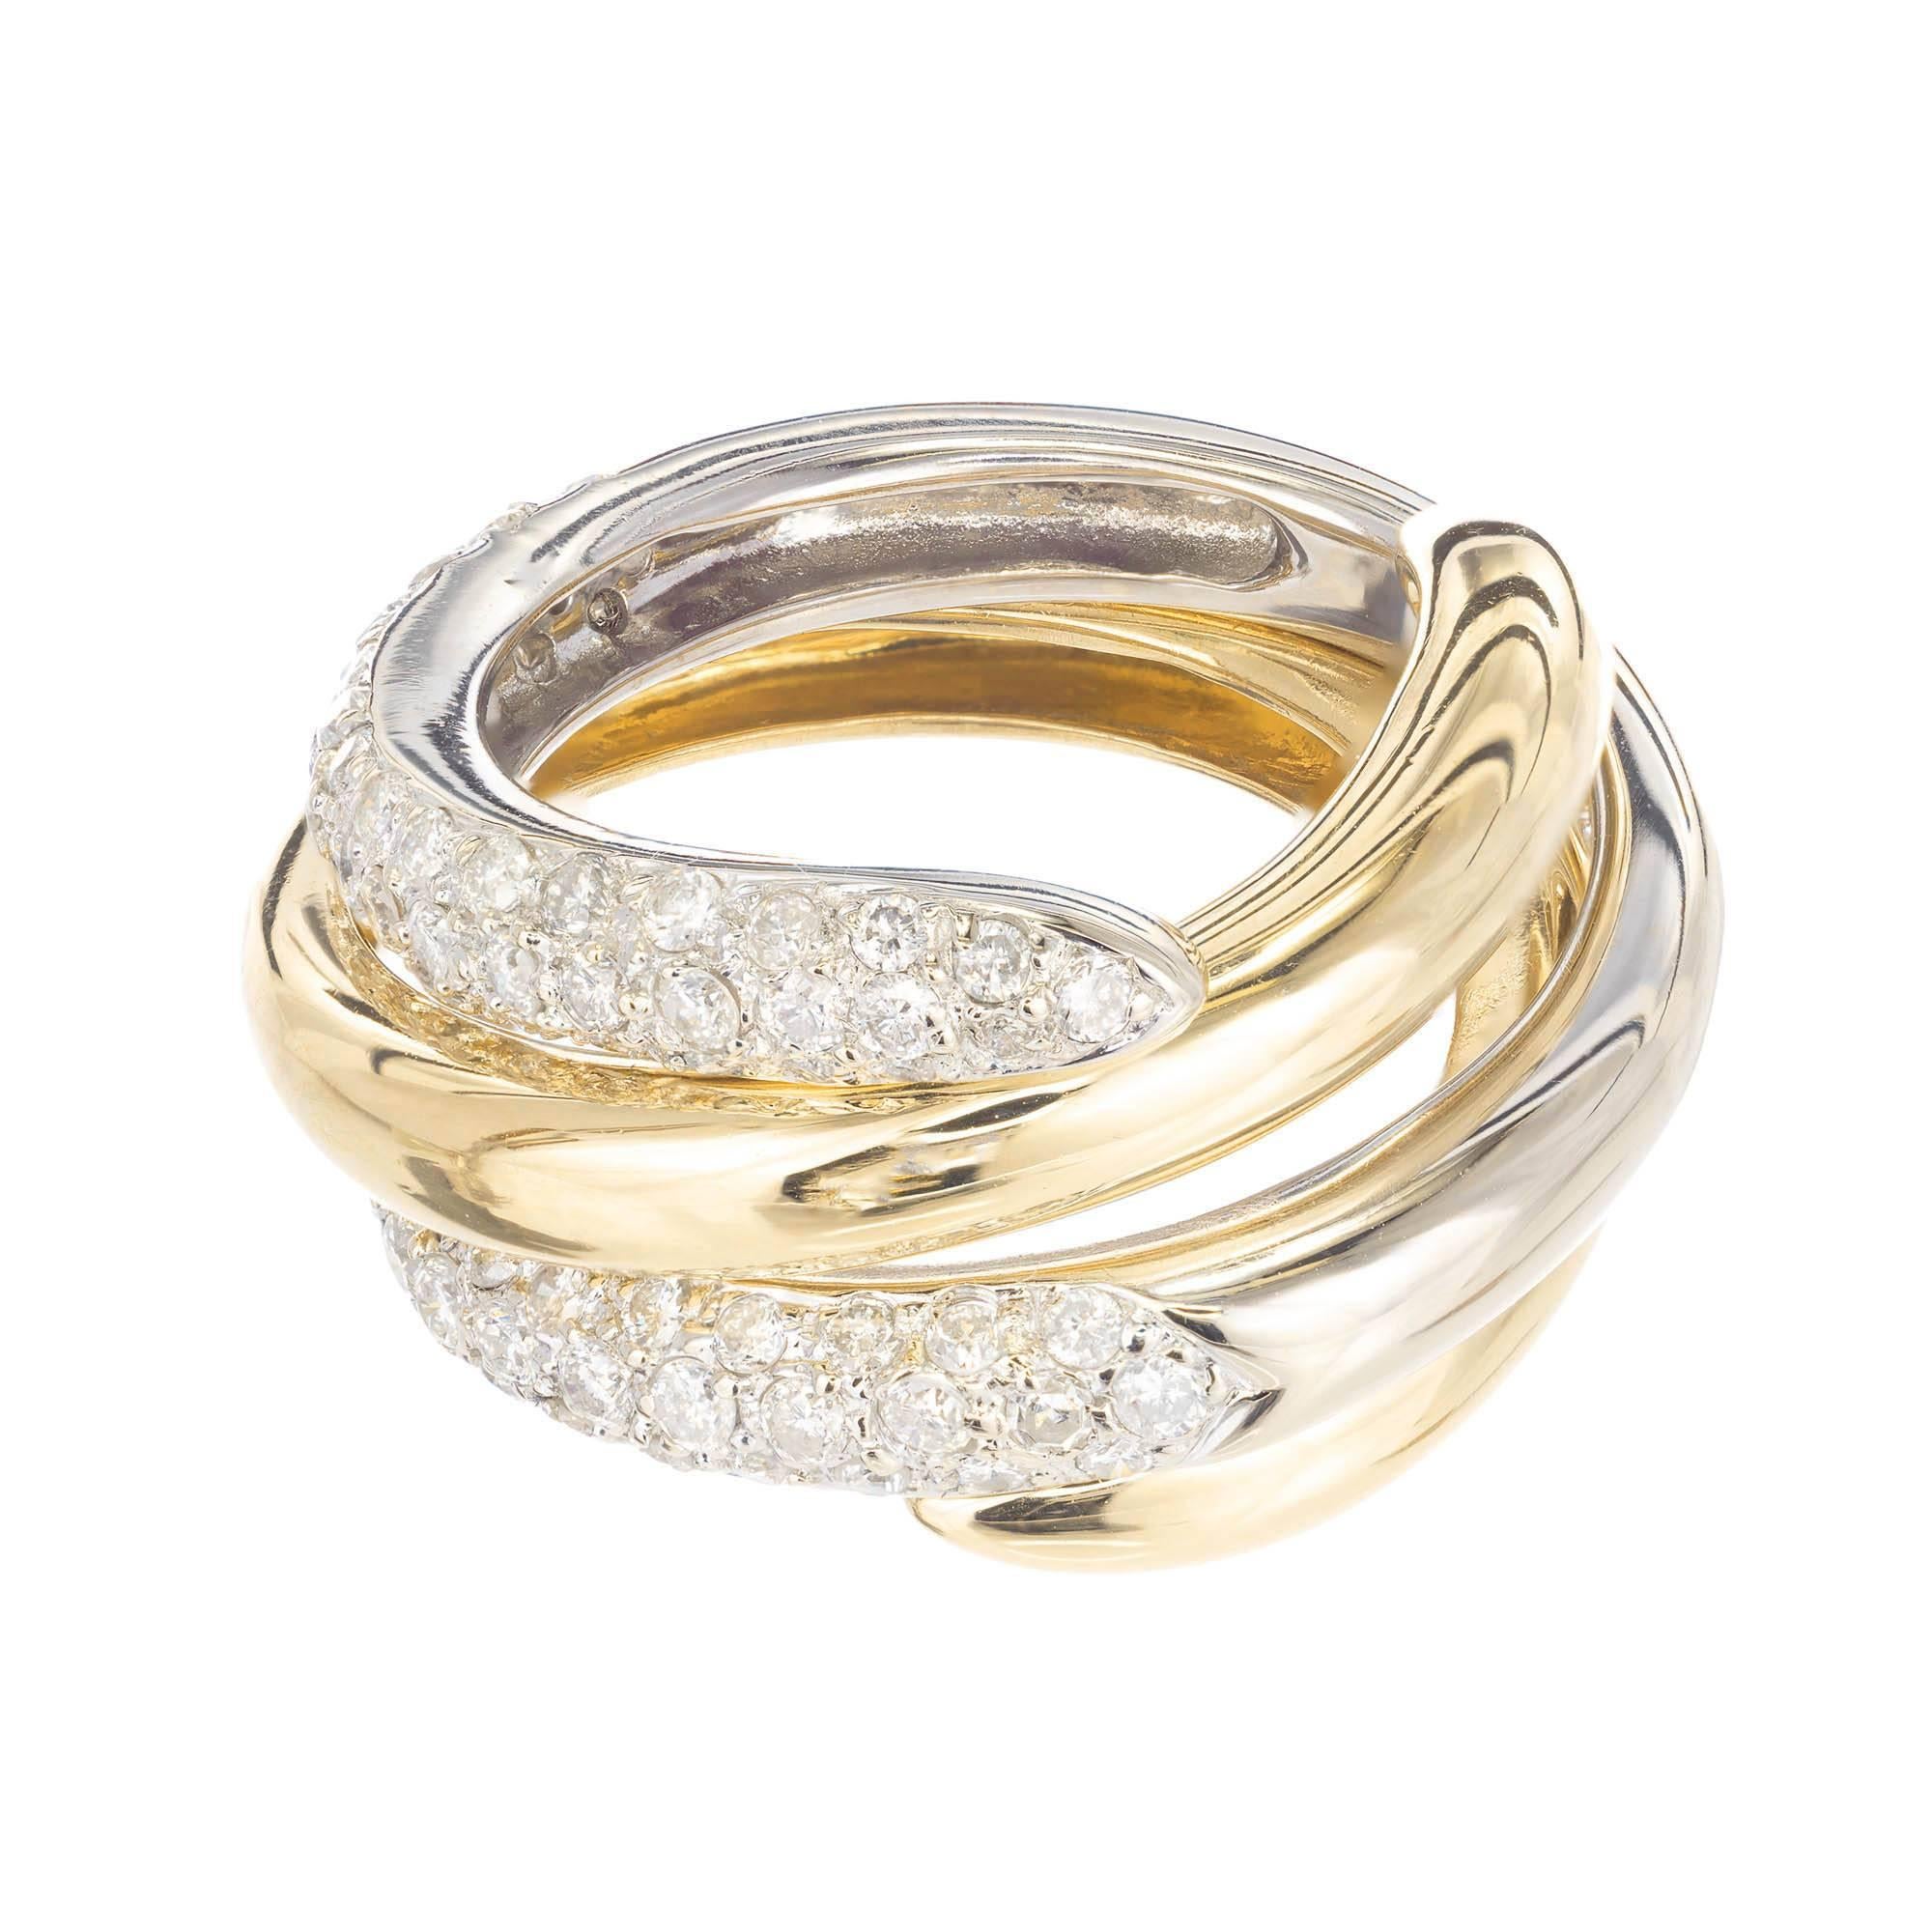 Two Tone gold Interlocking diamond swirl cocktail ring. Two rings that are on the spiral interlocking one is an 18k yellow gold high polish spiral. The second one is an 18k white gold diamond and pave set spiral on top. Rings can be worn together or